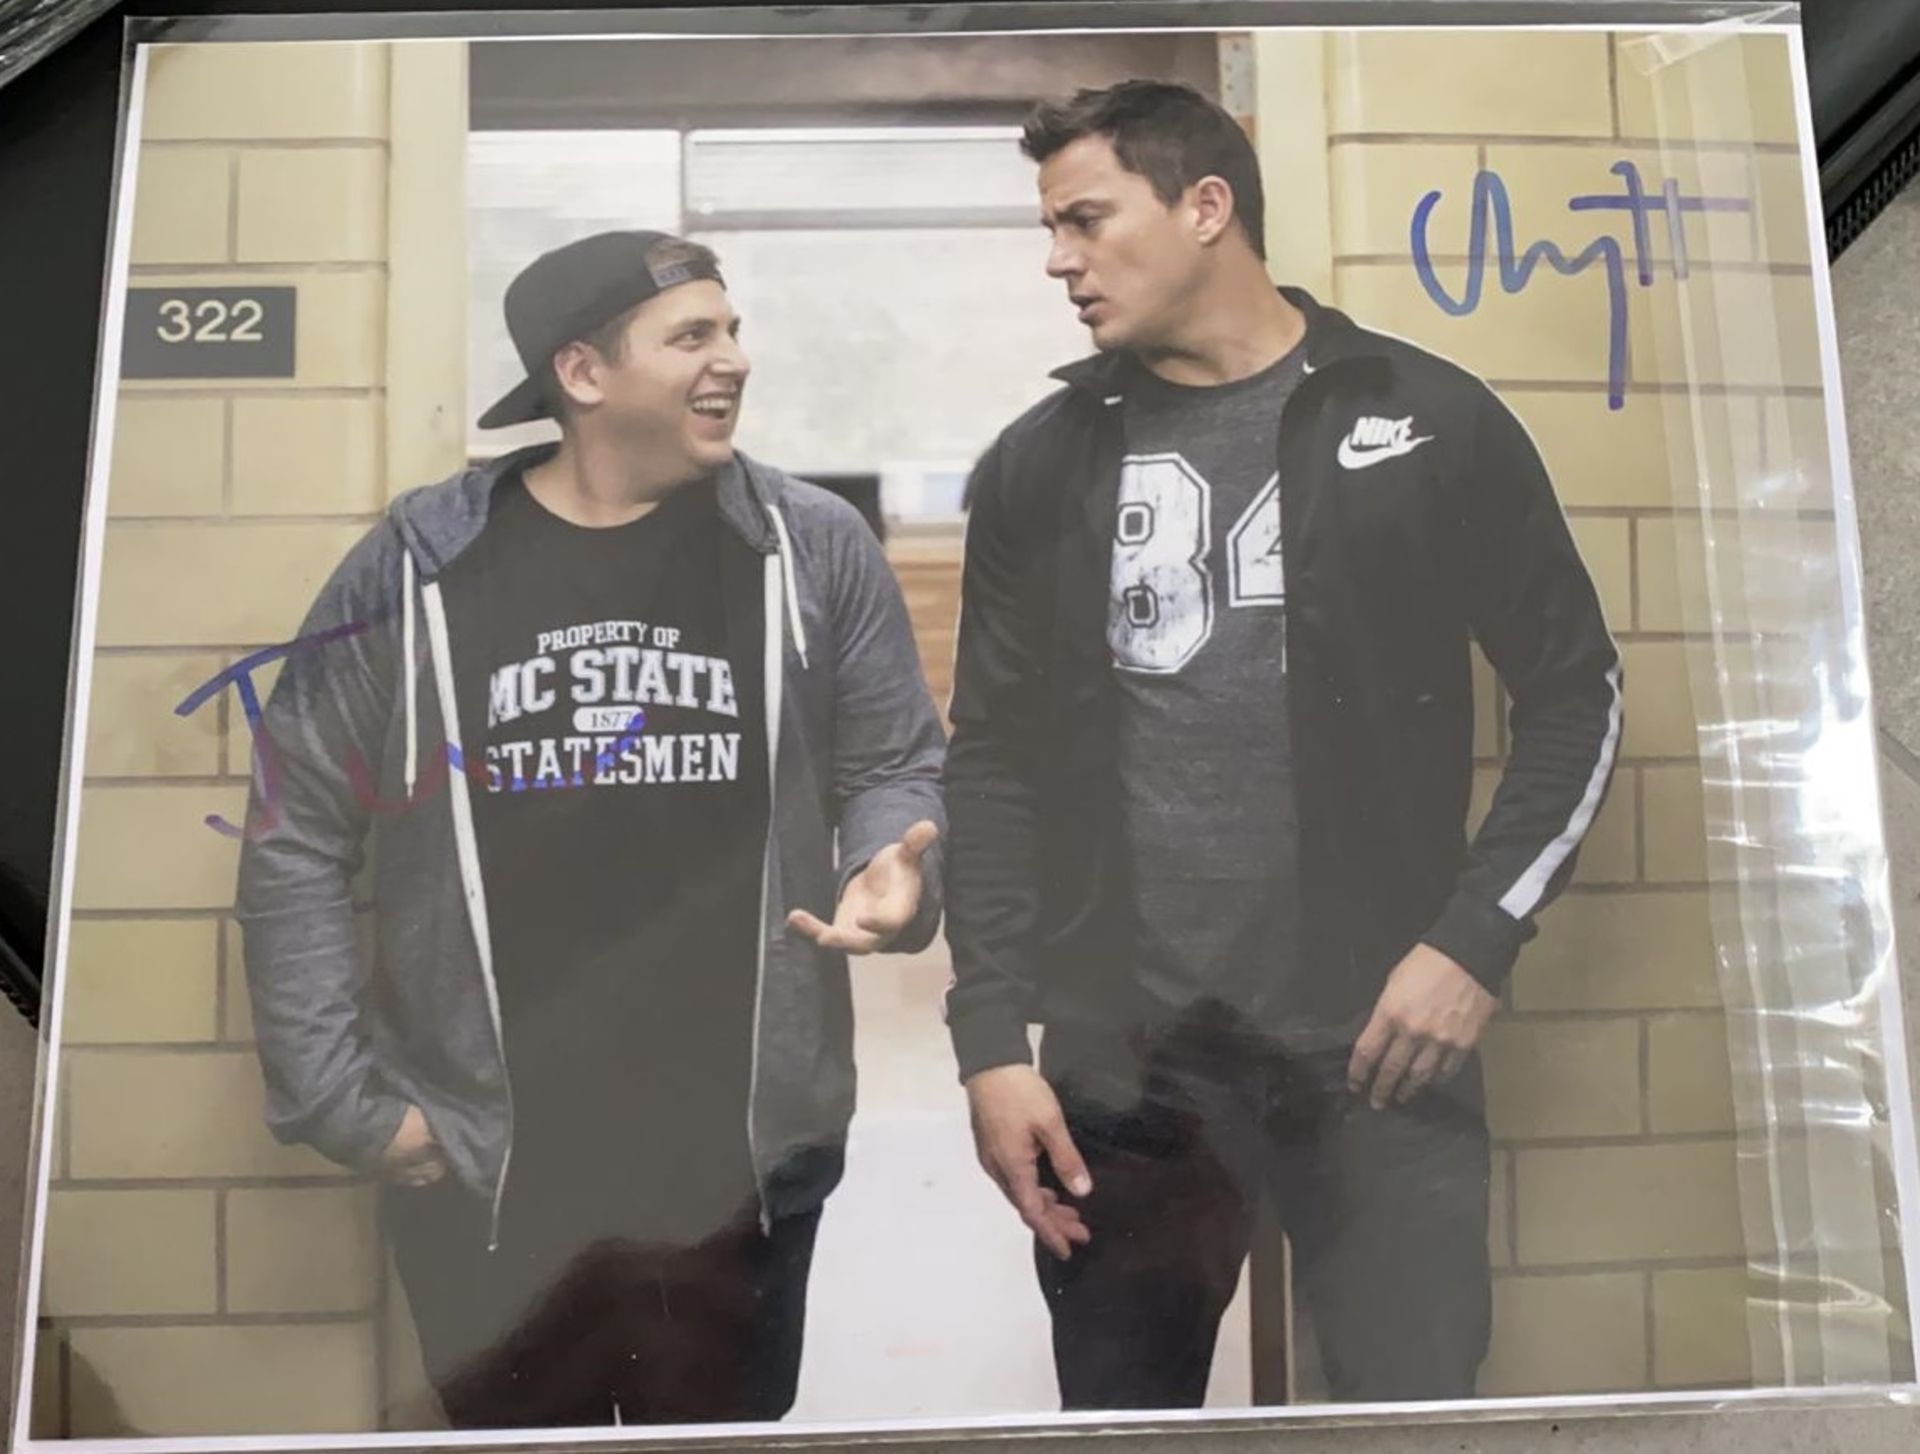 1 x Signed Autograph Picture - CHANNING TATUM & JONAH HILL - With COA - Size 10 x 8 Inch - NO VAT ON